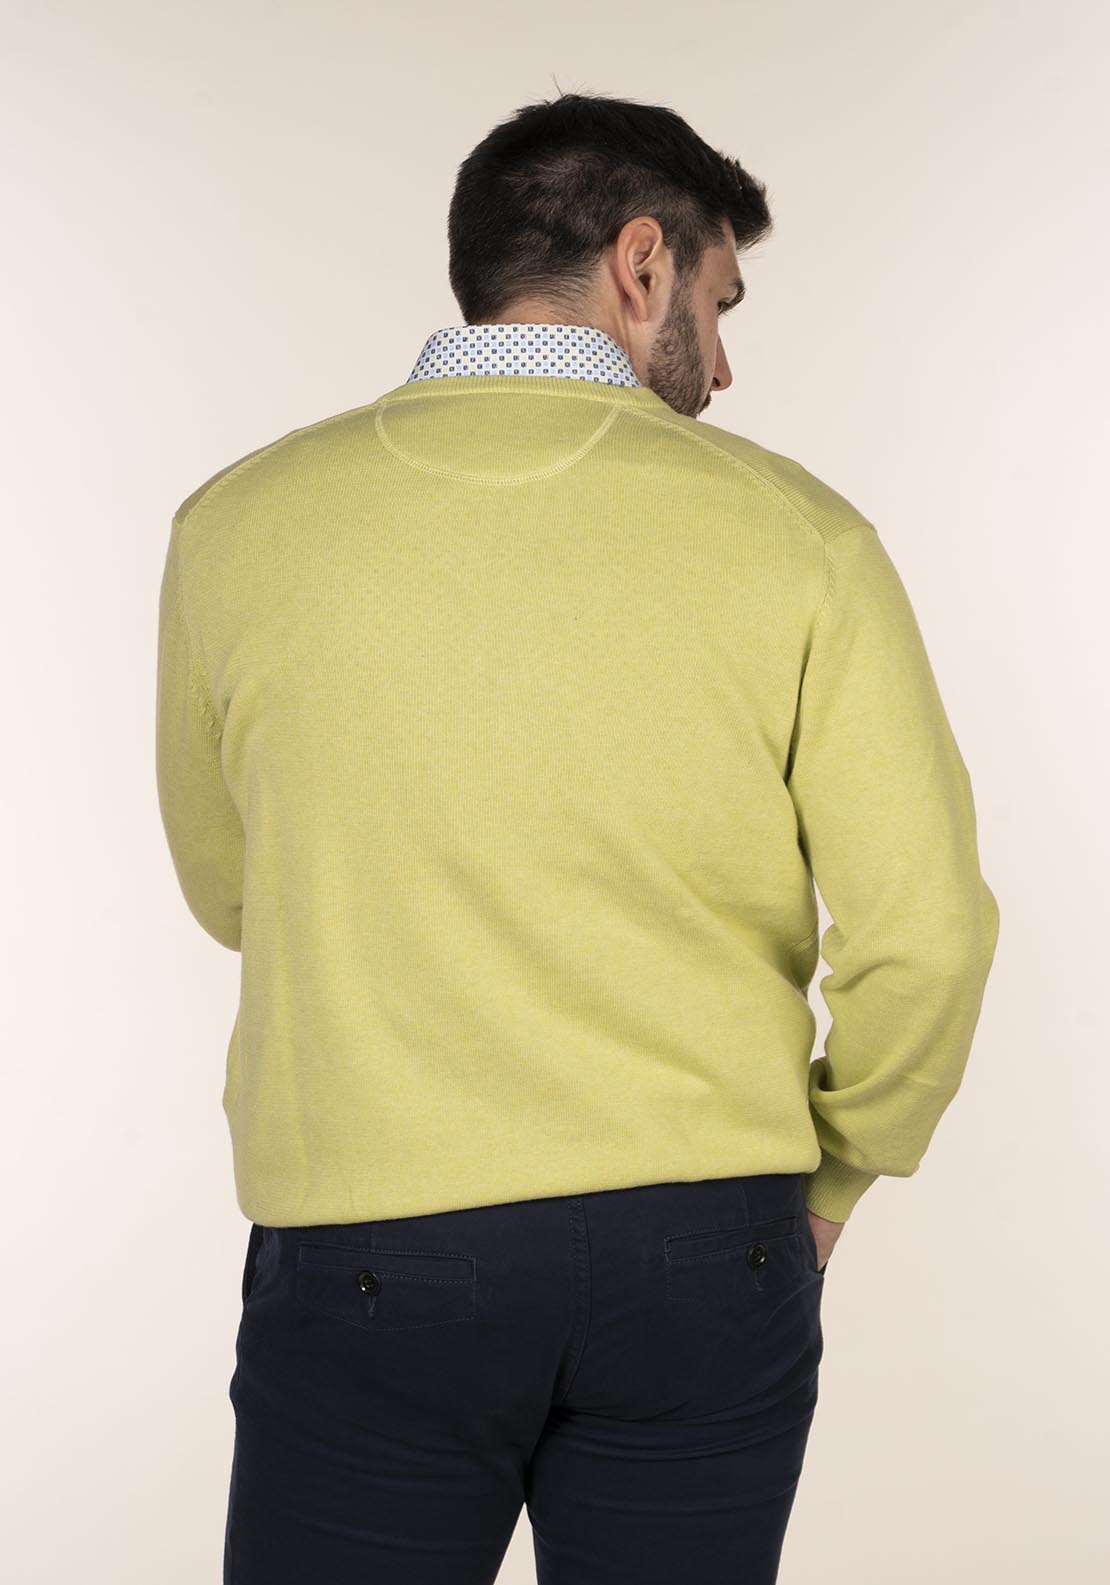 Yeats Plain Cotton V Neck Sweaters 5 Shaws Department Stores